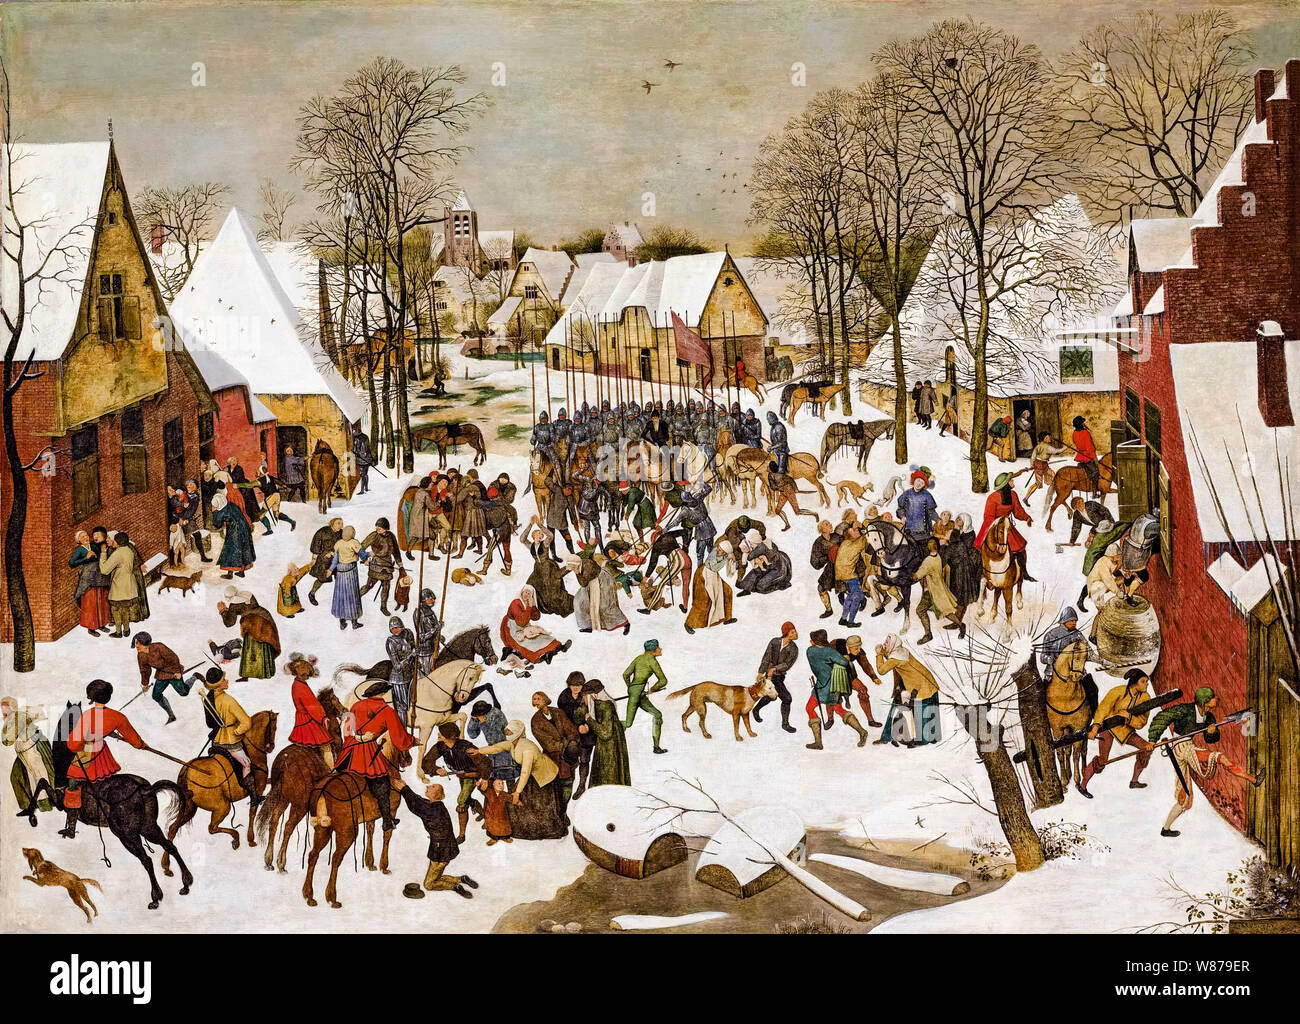 Pieter Brueghel the Younger, A winter landscape with the Massacre of the Innocents, painting, 1564-1638 Stock Photo